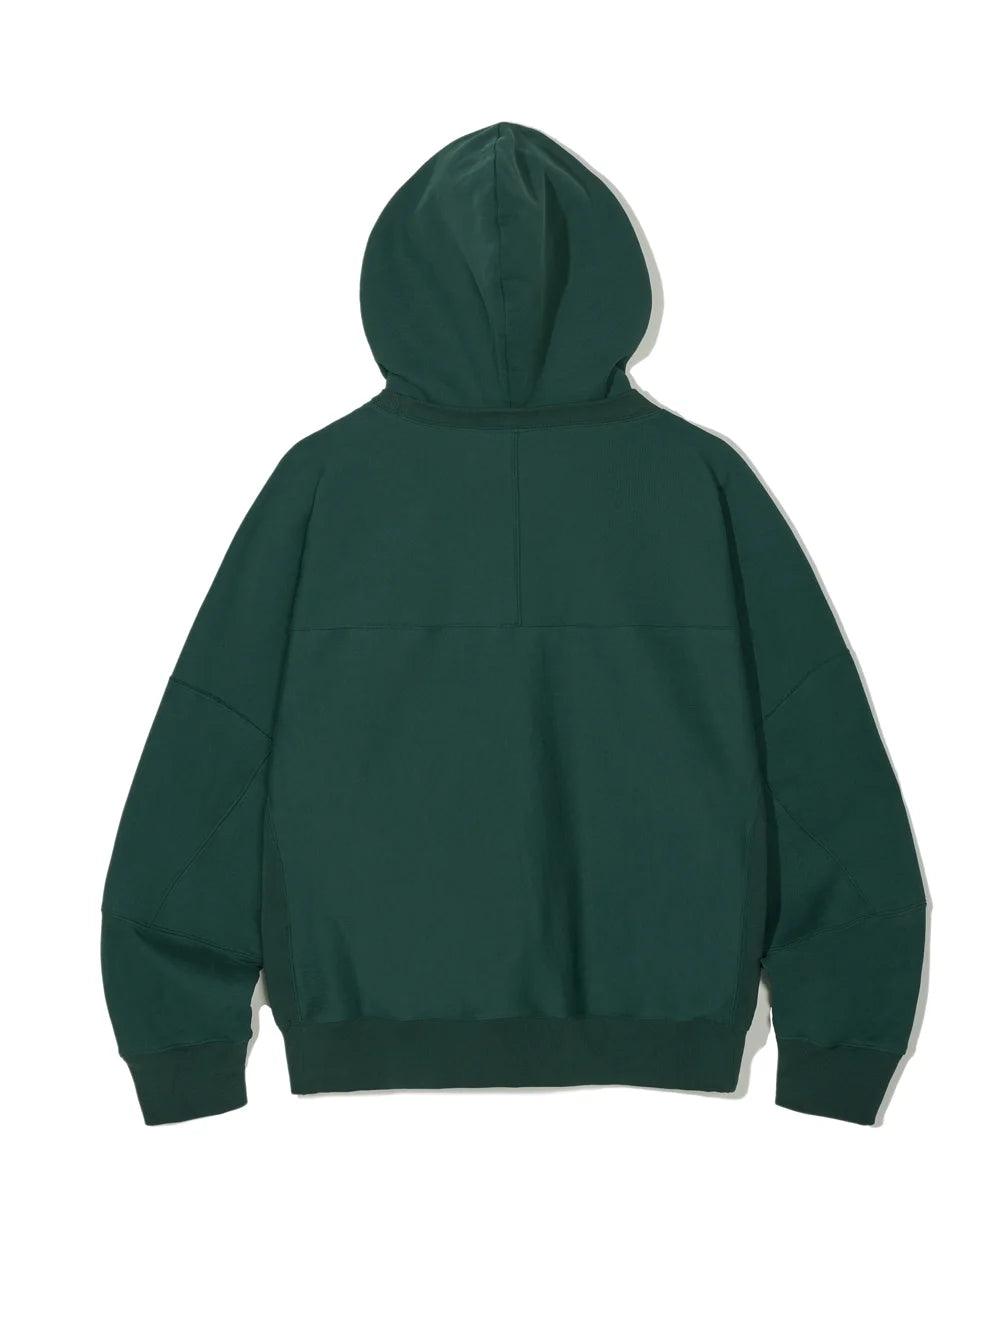 Partimento Layered Structure Hoodie - Green - Sweatshirts